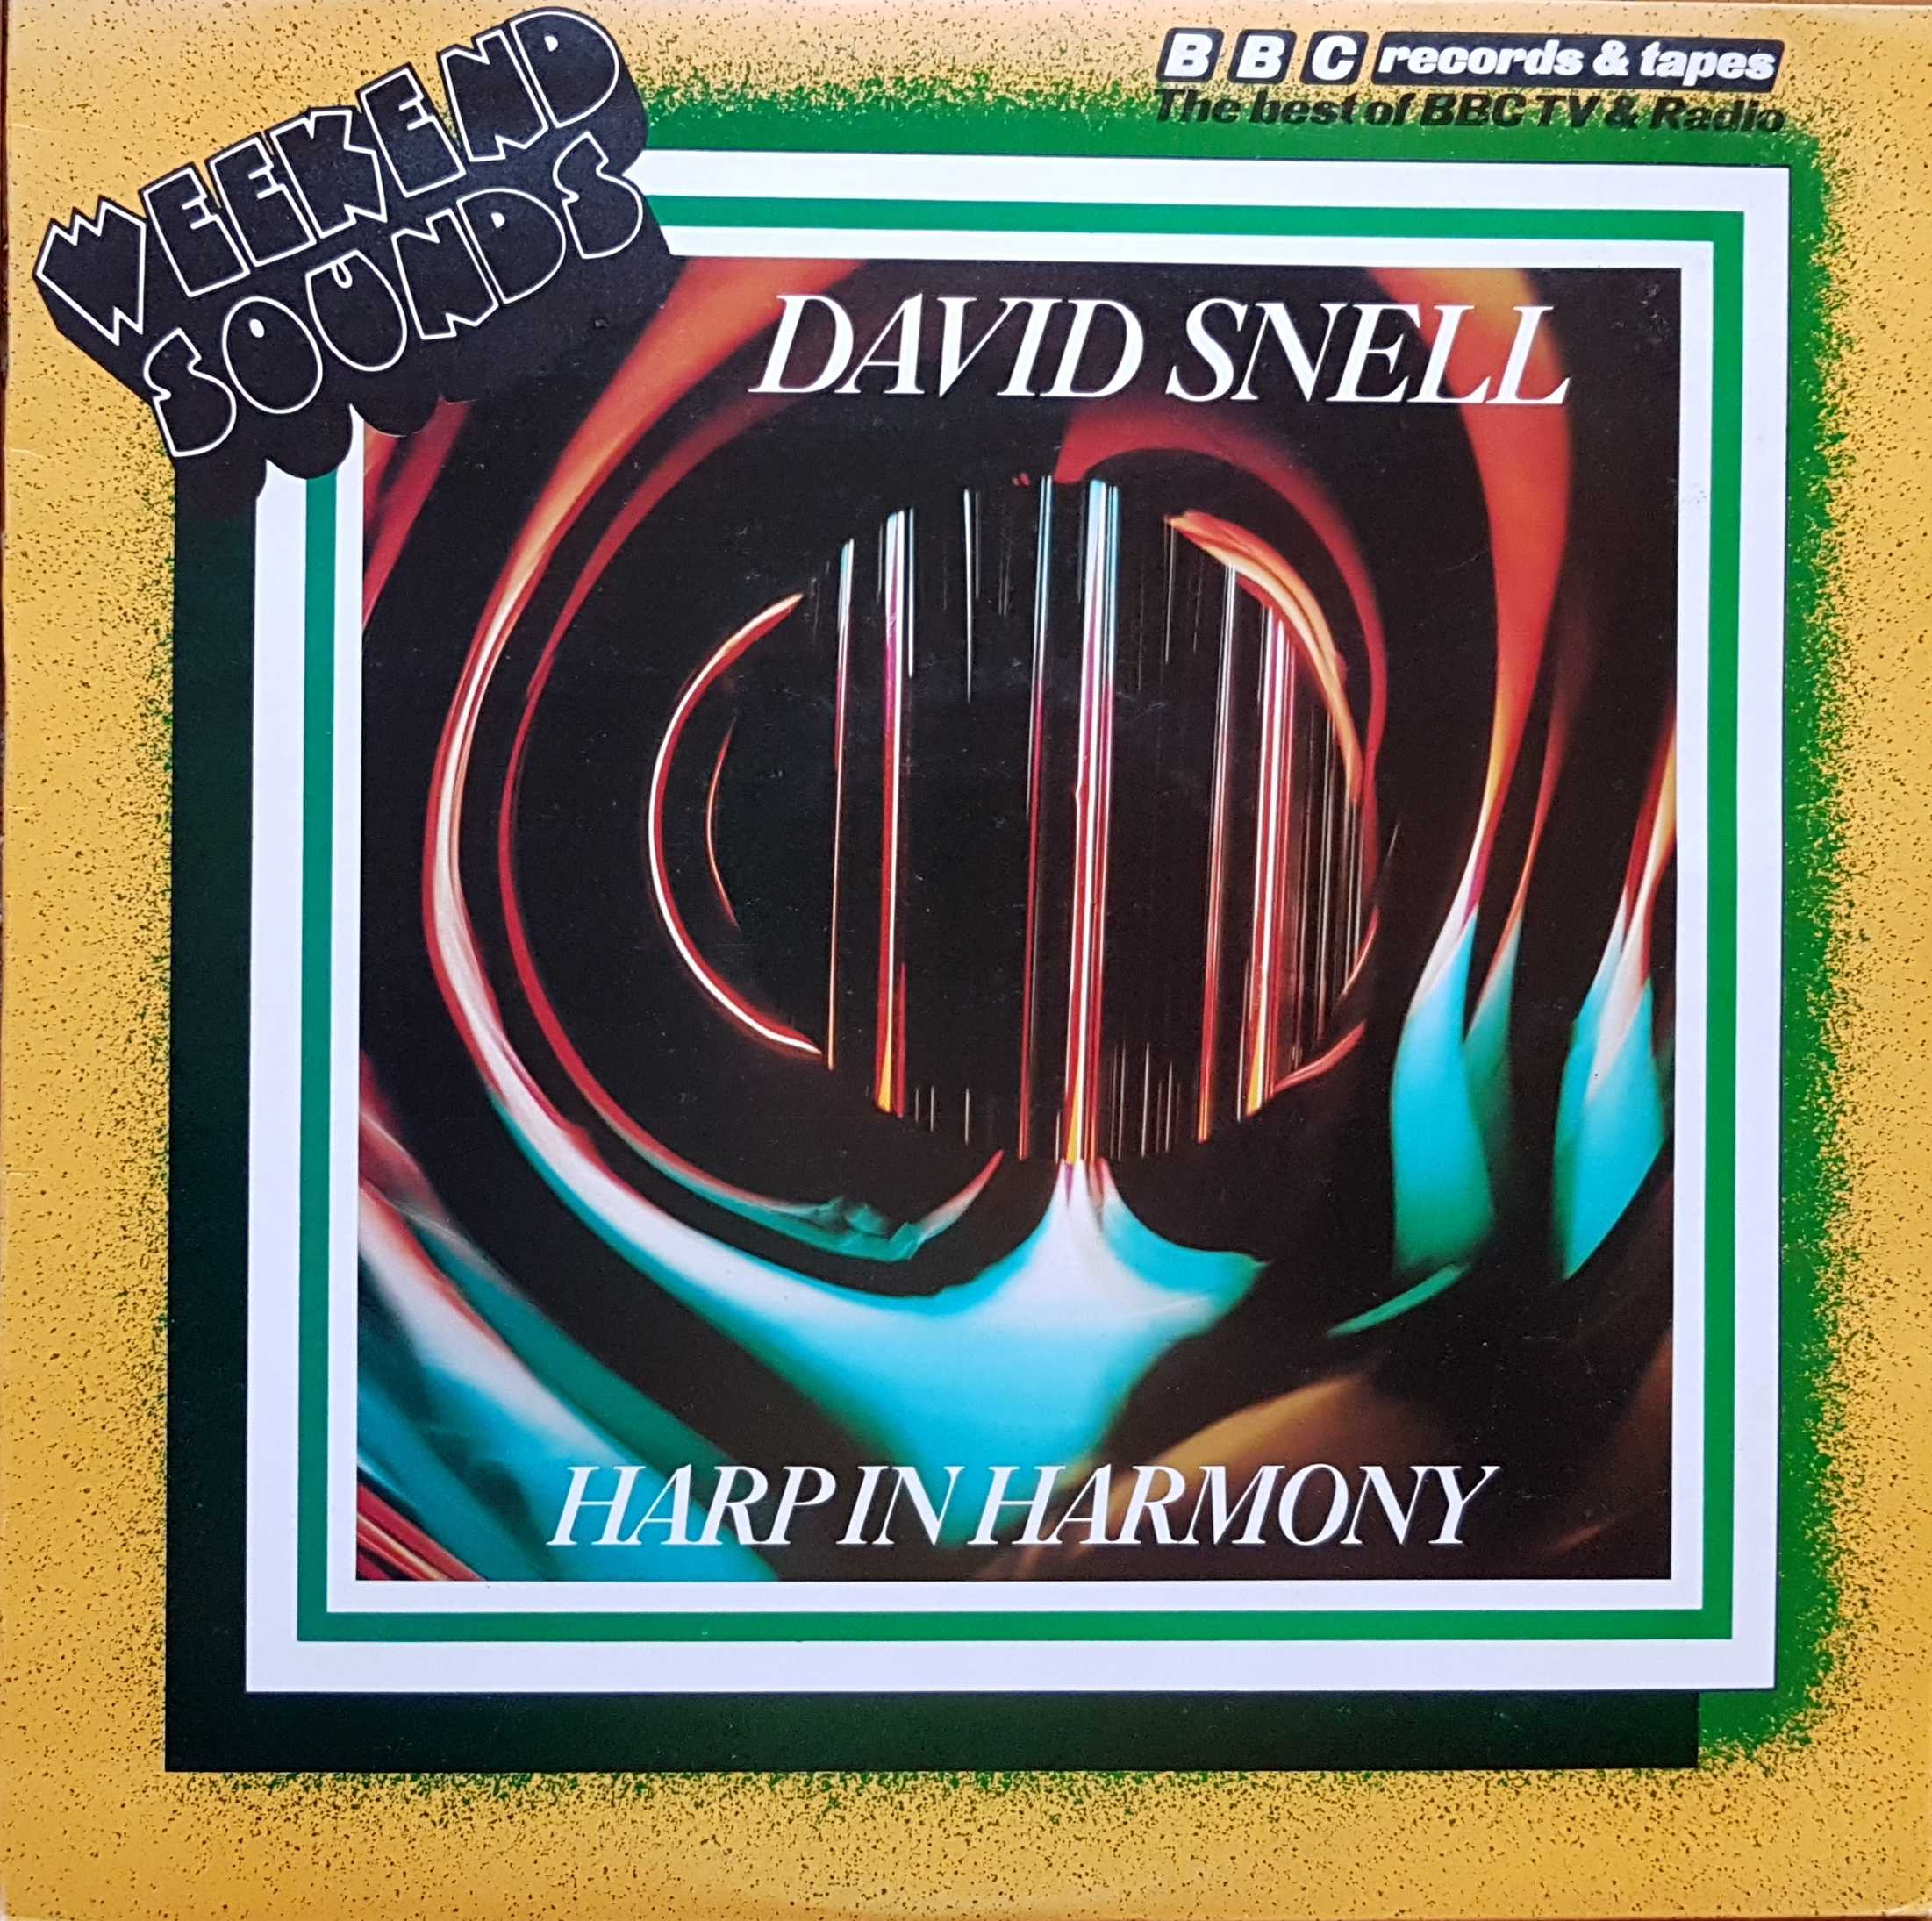 Picture of REC 311 Harp in harmony by artist David Snell from the BBC records and Tapes library